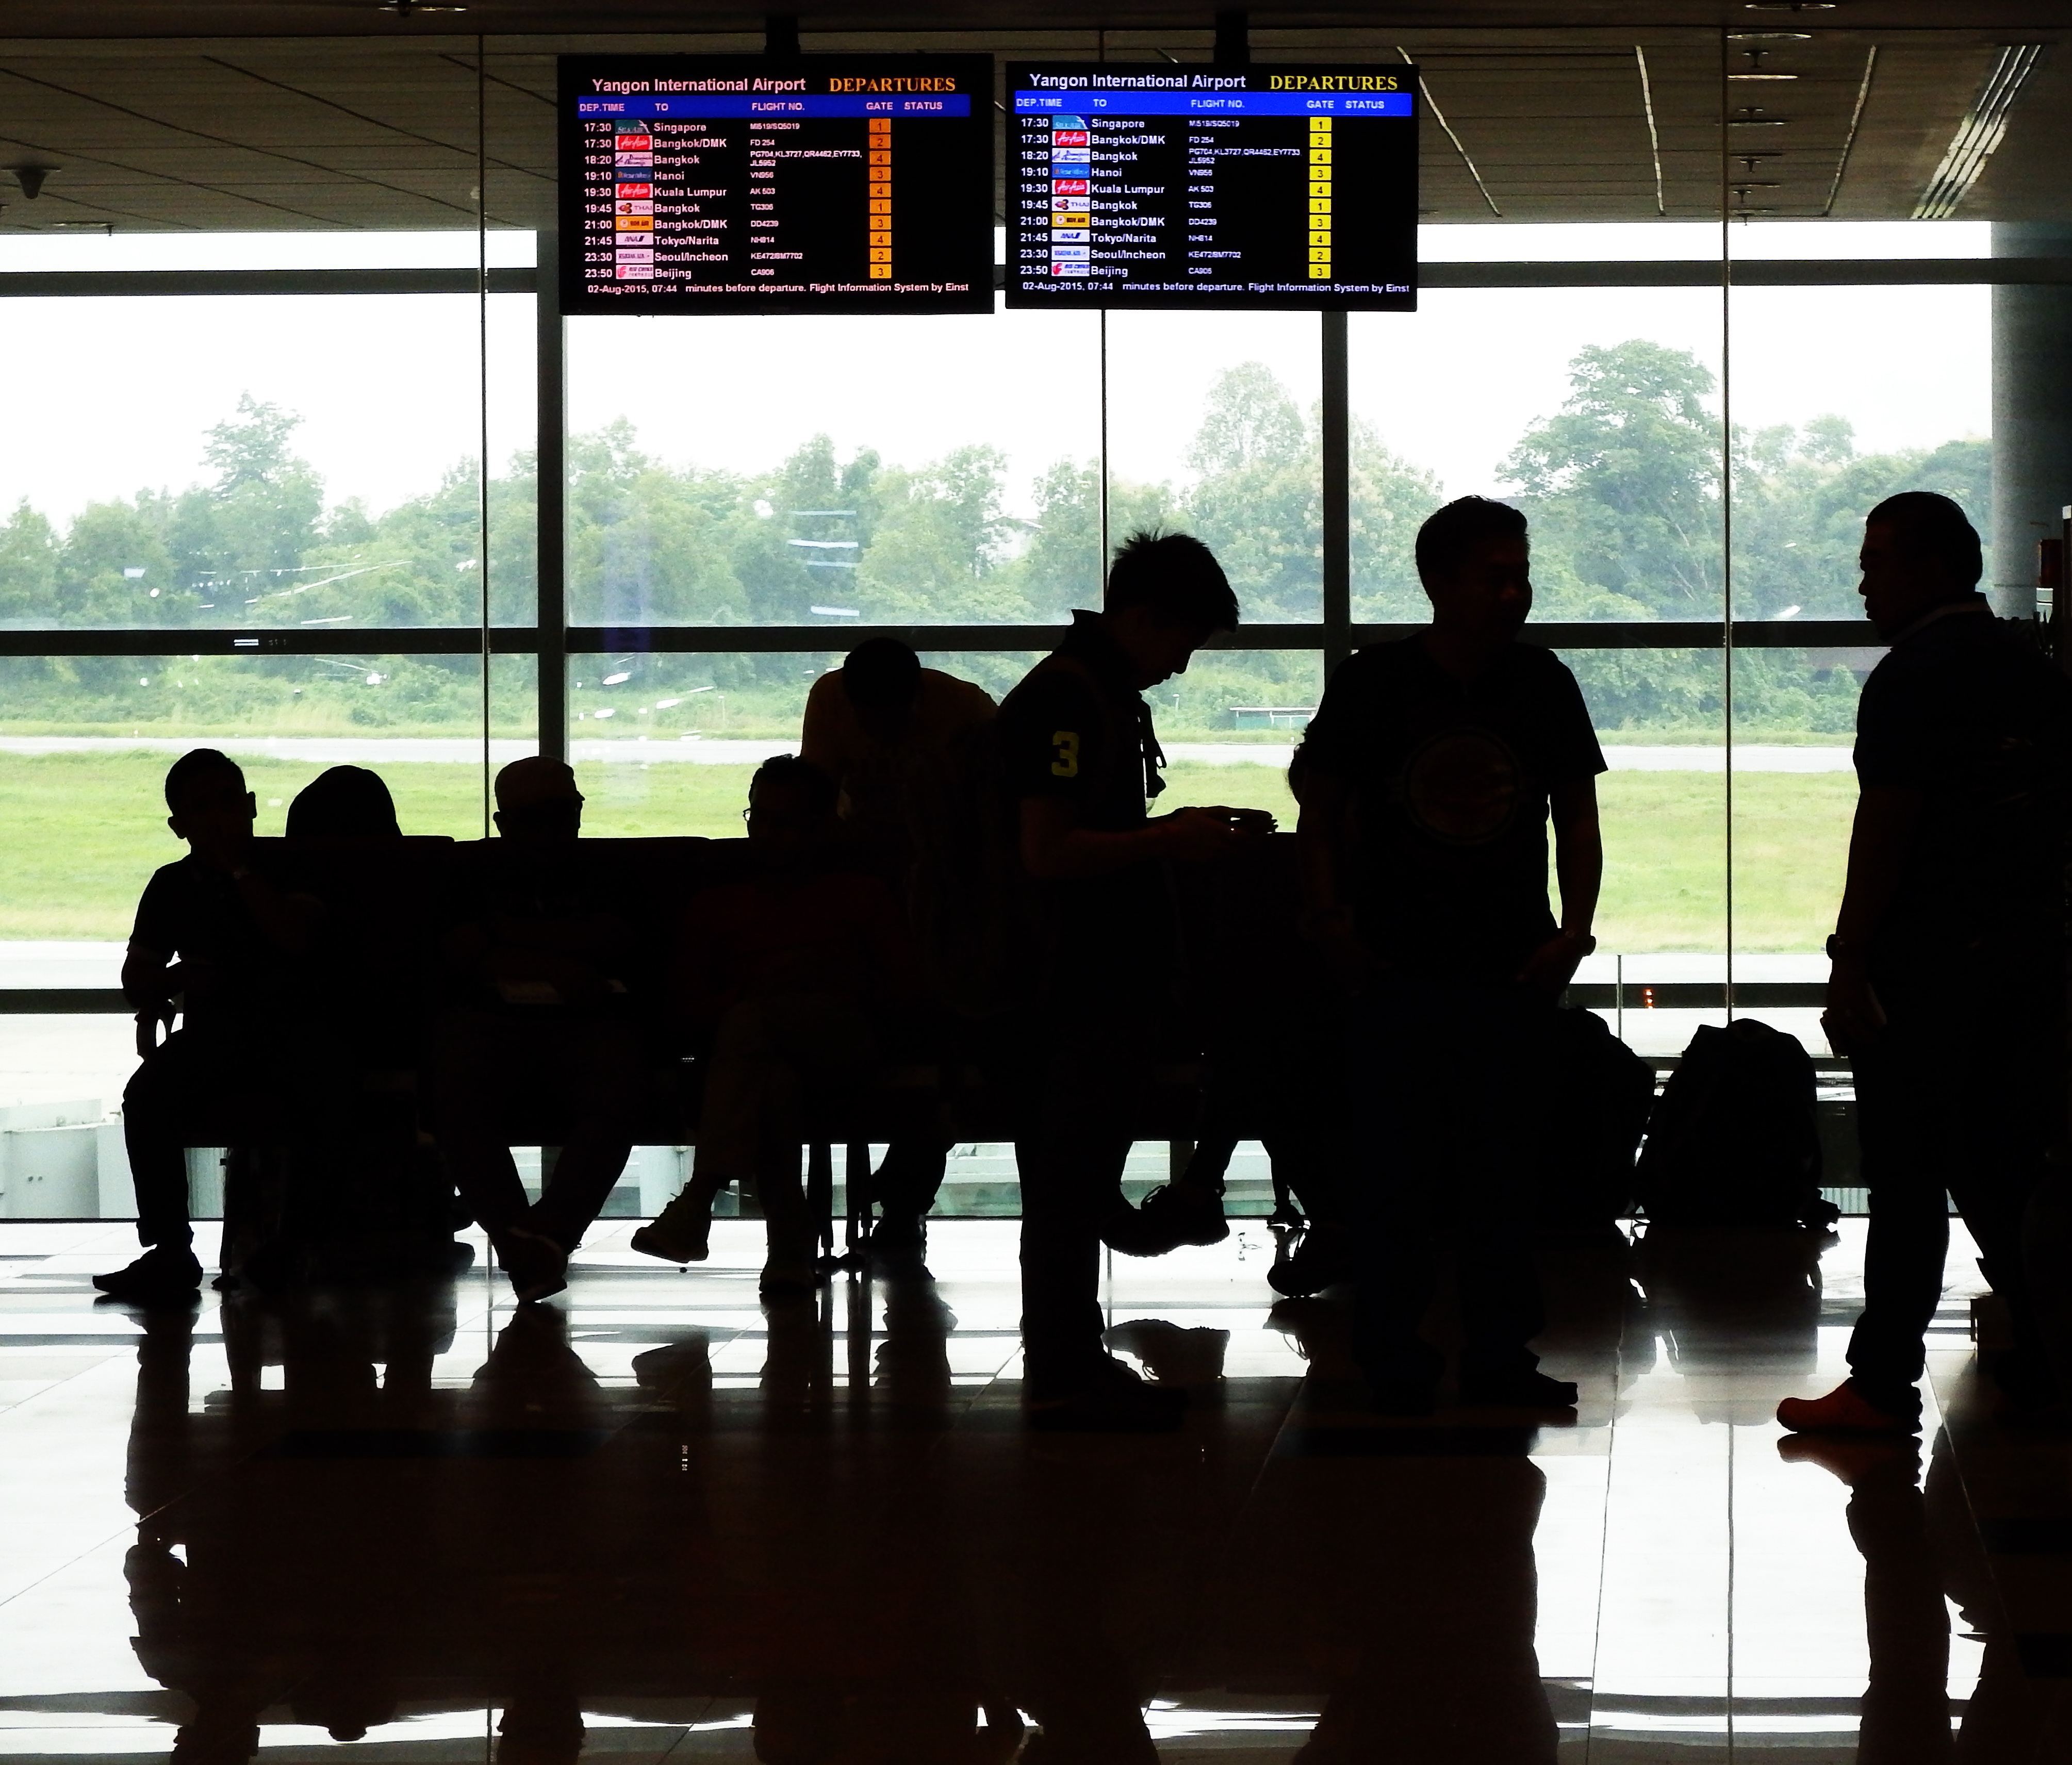 Silhouettes at Airport while waiting